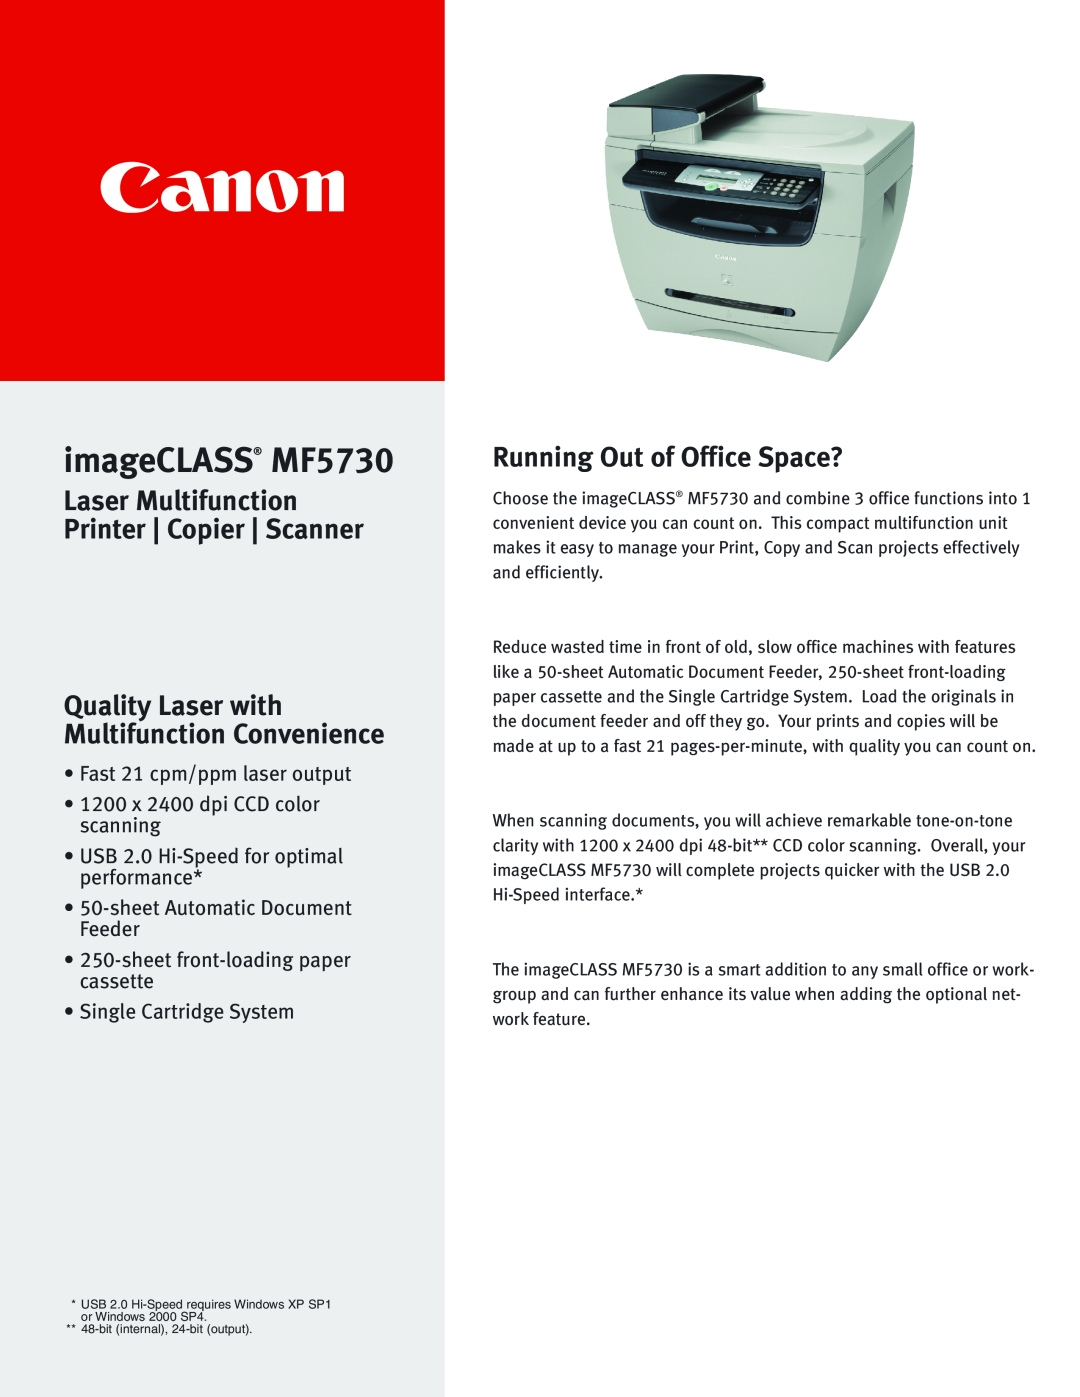 Canon manual imageCLASS MF5730, Running Out of Office Space?, Laser Multifunction Printer Copier Scanner 